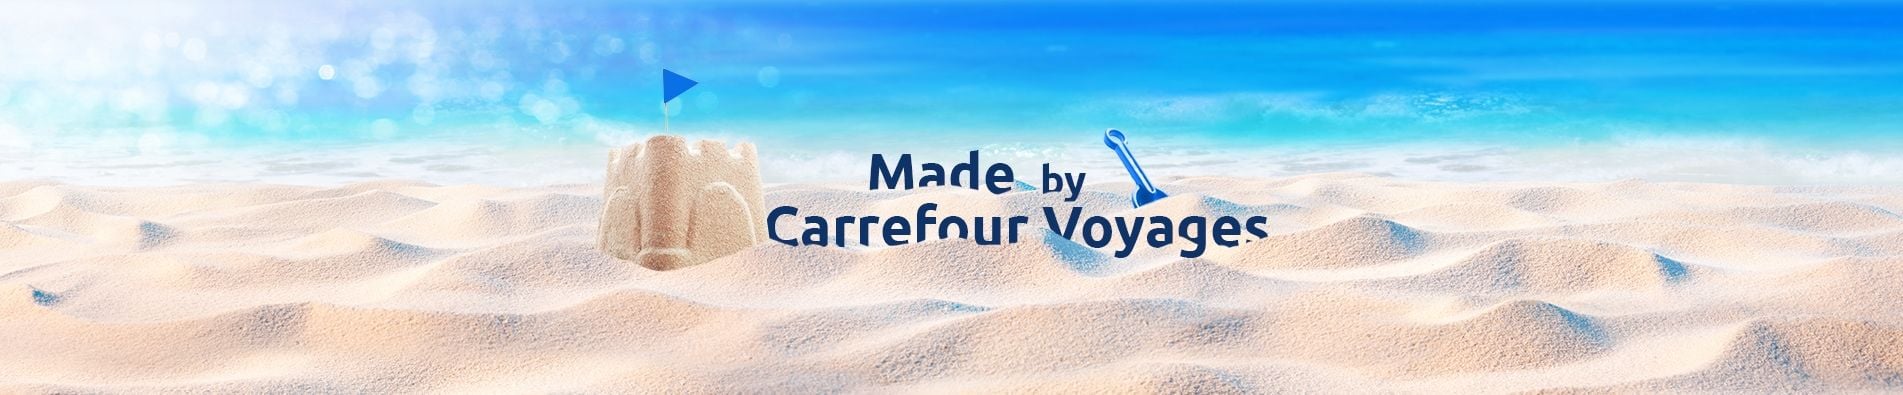 Voyages Made by Carrefour Voyages